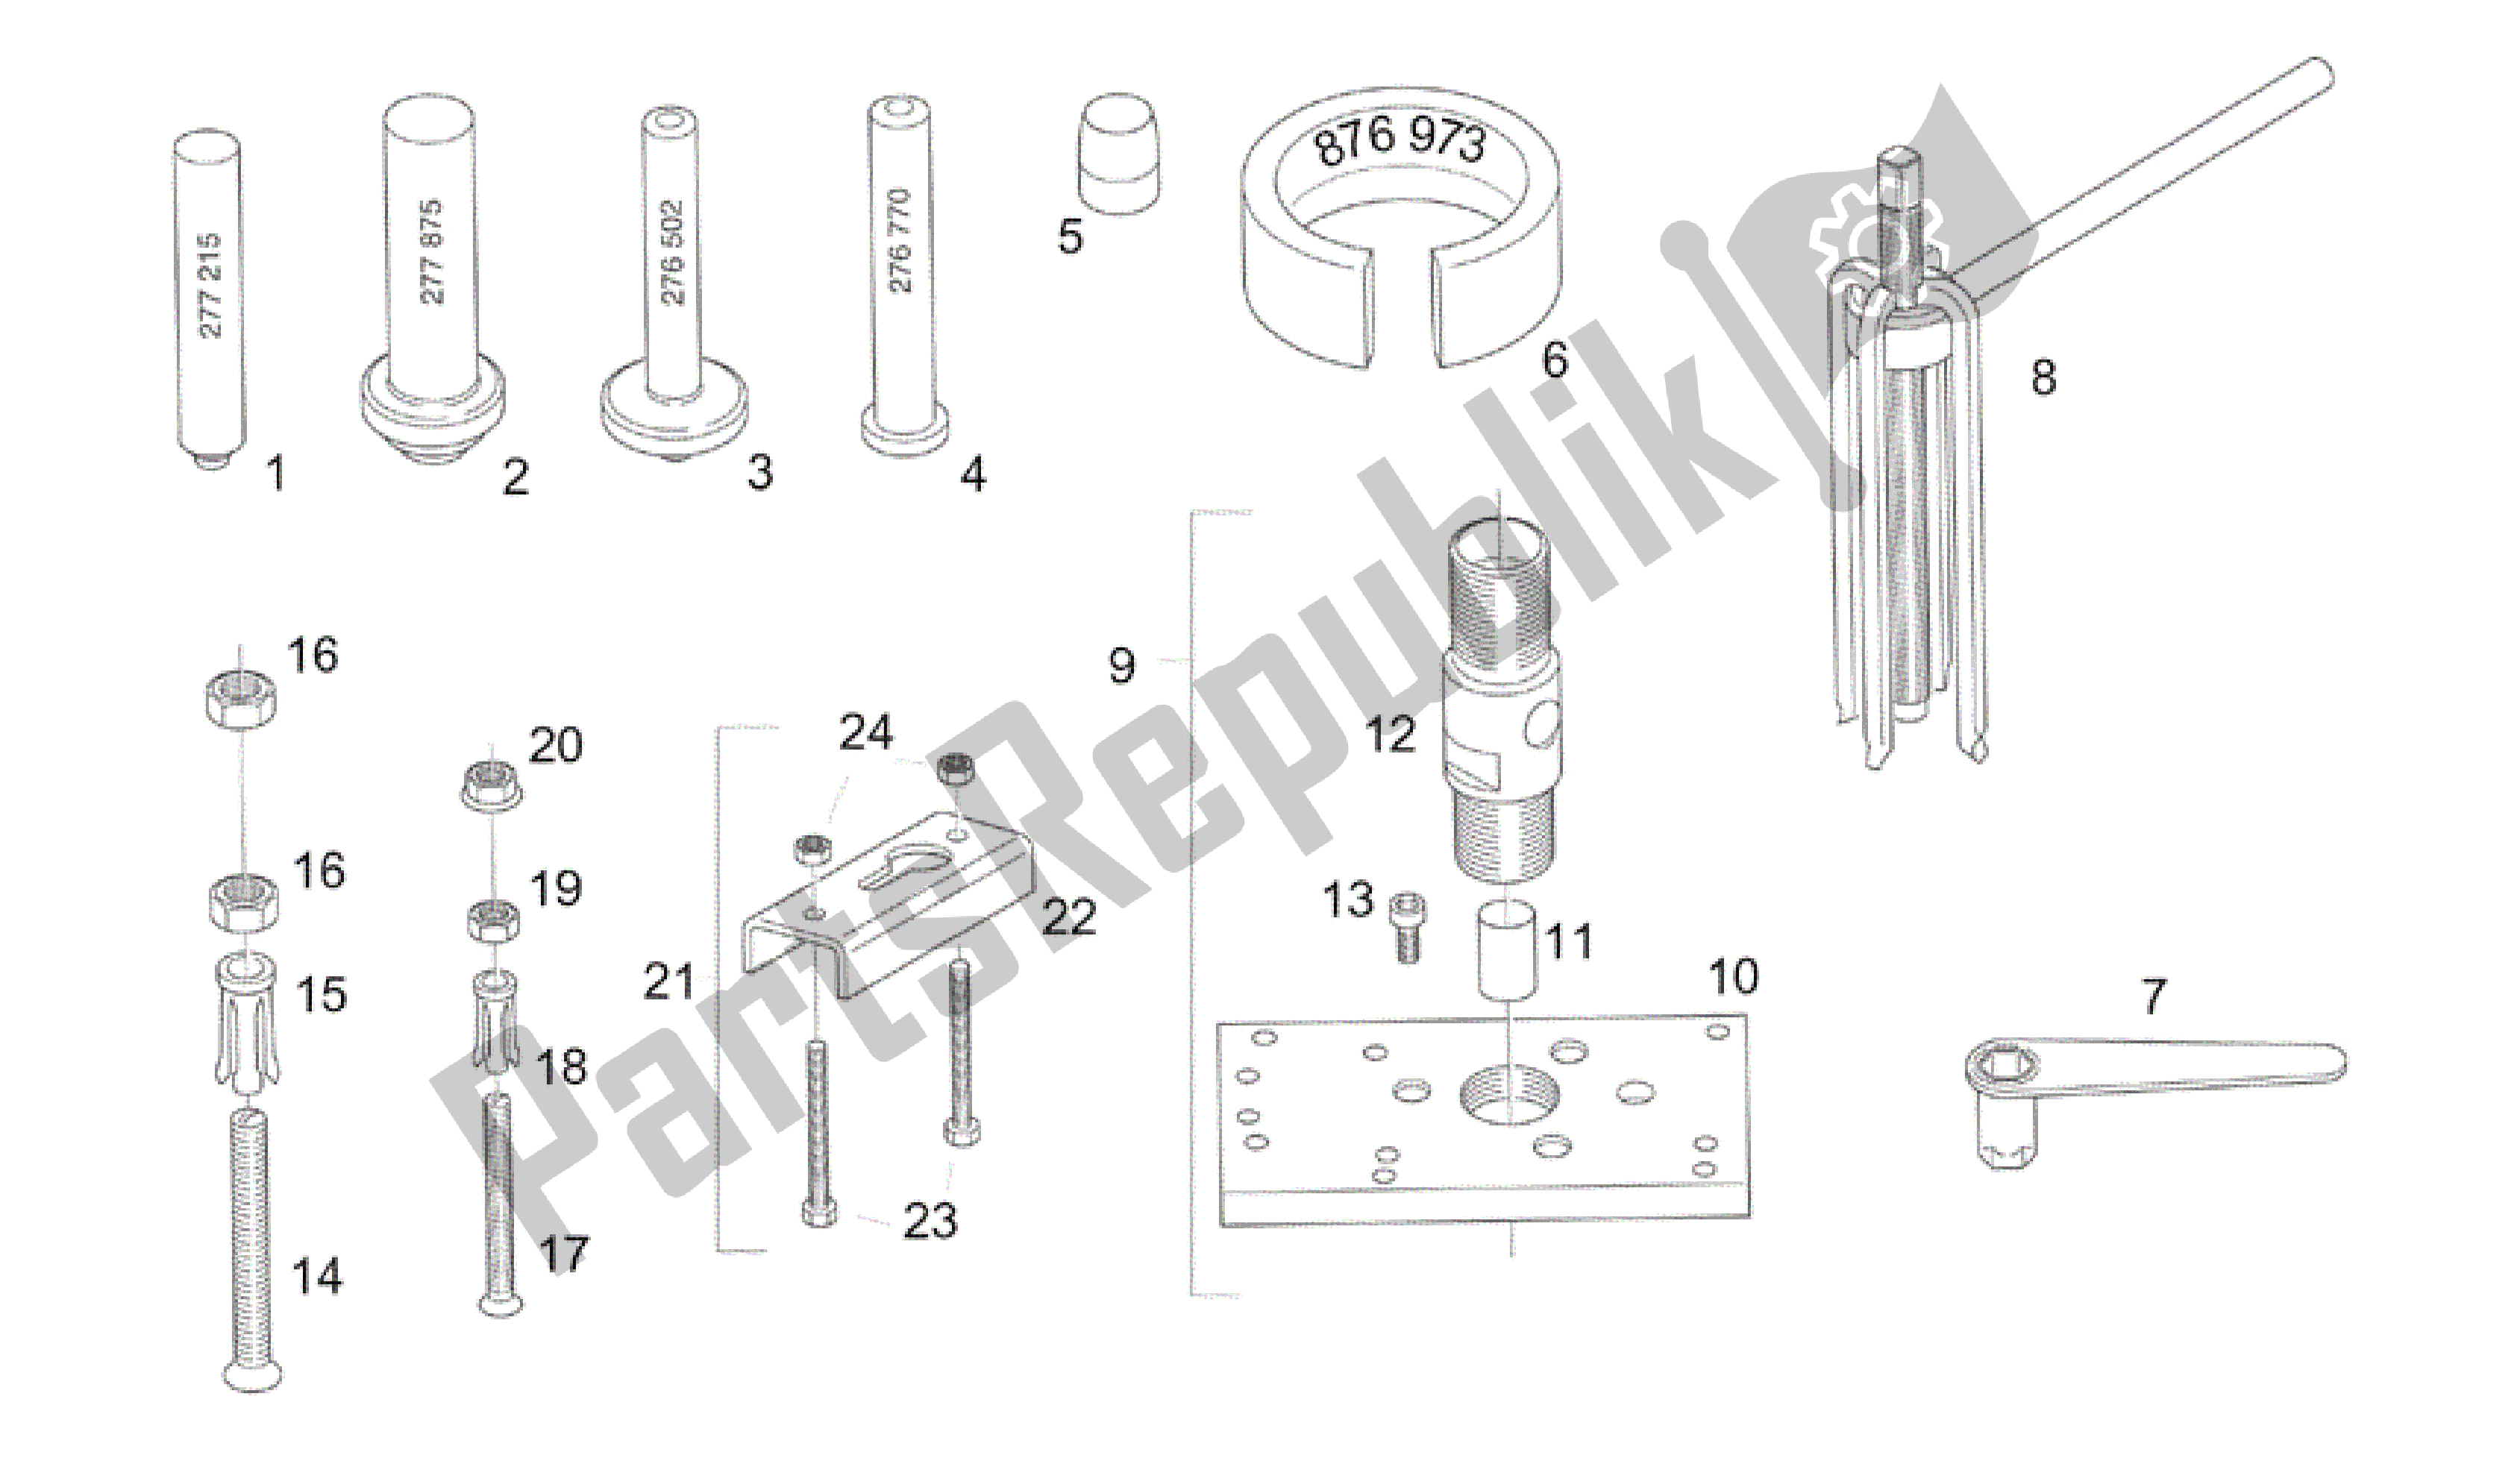 All parts for the Repairing Tools I of the Aprilia Rotax 122 125 1996 - 1997